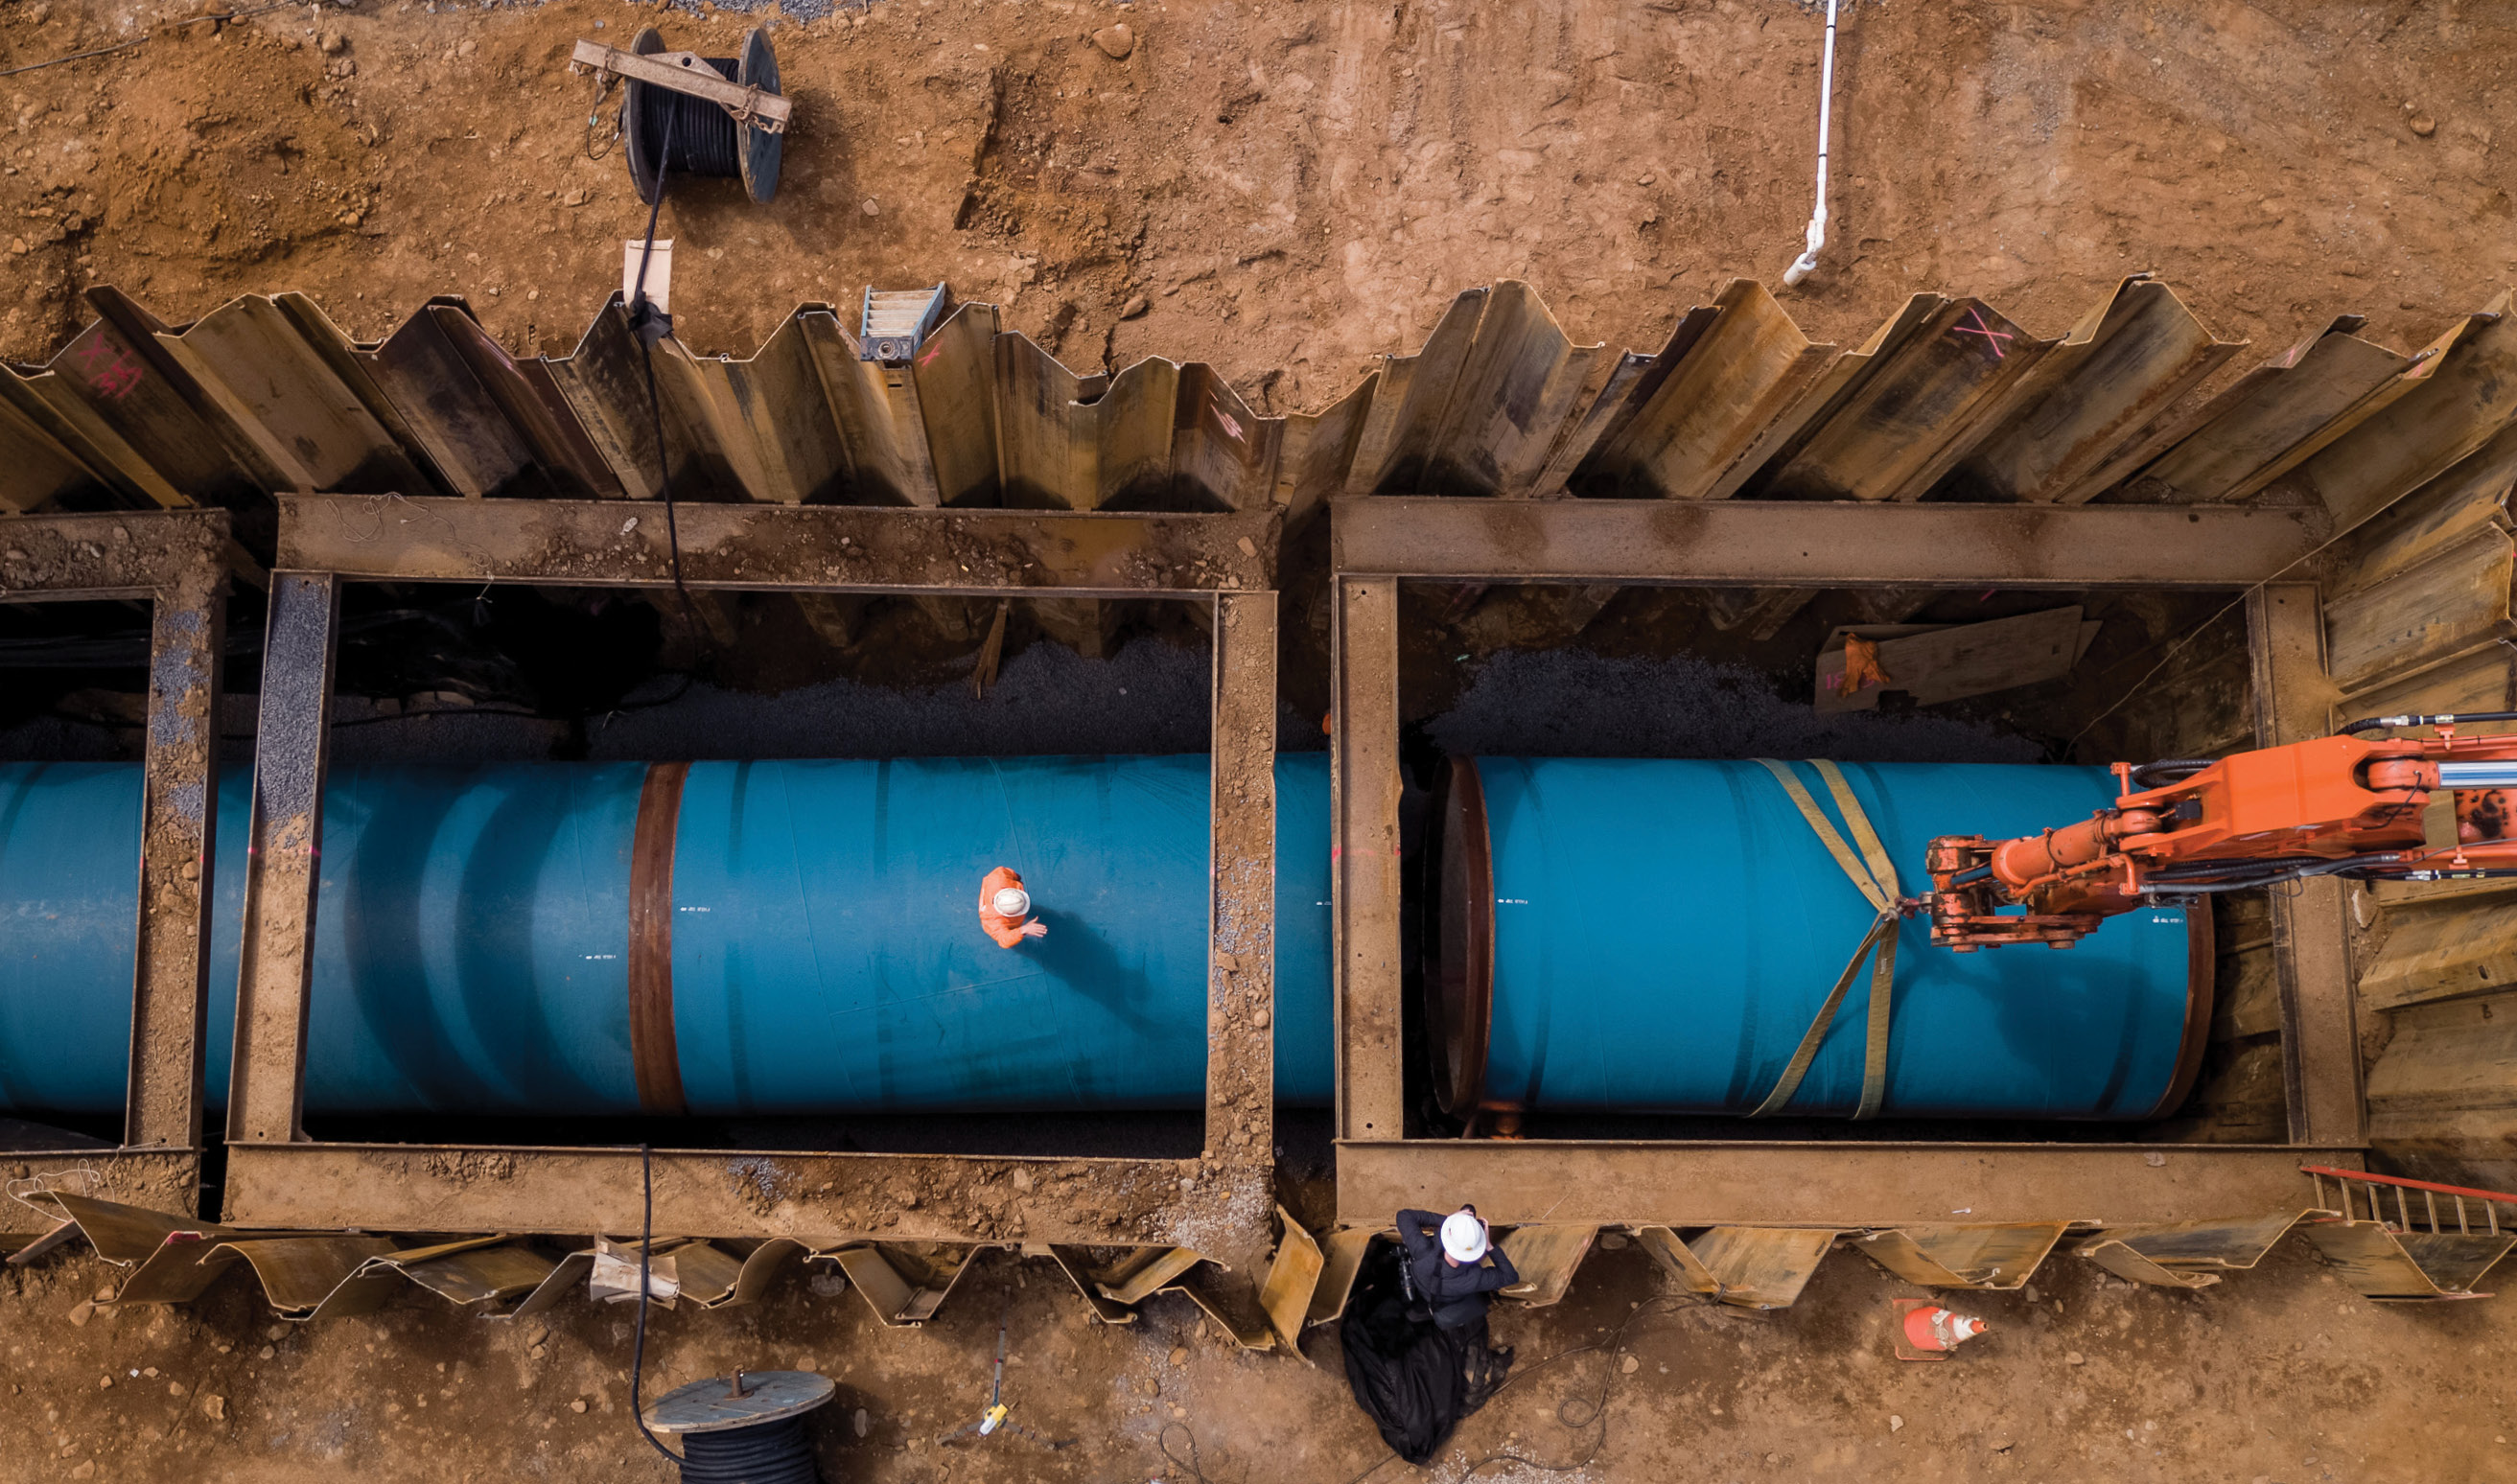 Arial view of a construction site where a section of water transmission main is being laid. We're looking down into a large trench, dug into and surrounded by reddish dirt, with the sides supported by massive corrugated metal panels and steel beams as an orange crane arm lowers a piece of bright blue pipe, at least 10 feet wide and 20 long, into the hole. Workers can be seen looking on, standing on another section of the pipe and on the side of the trench, and seem very small.